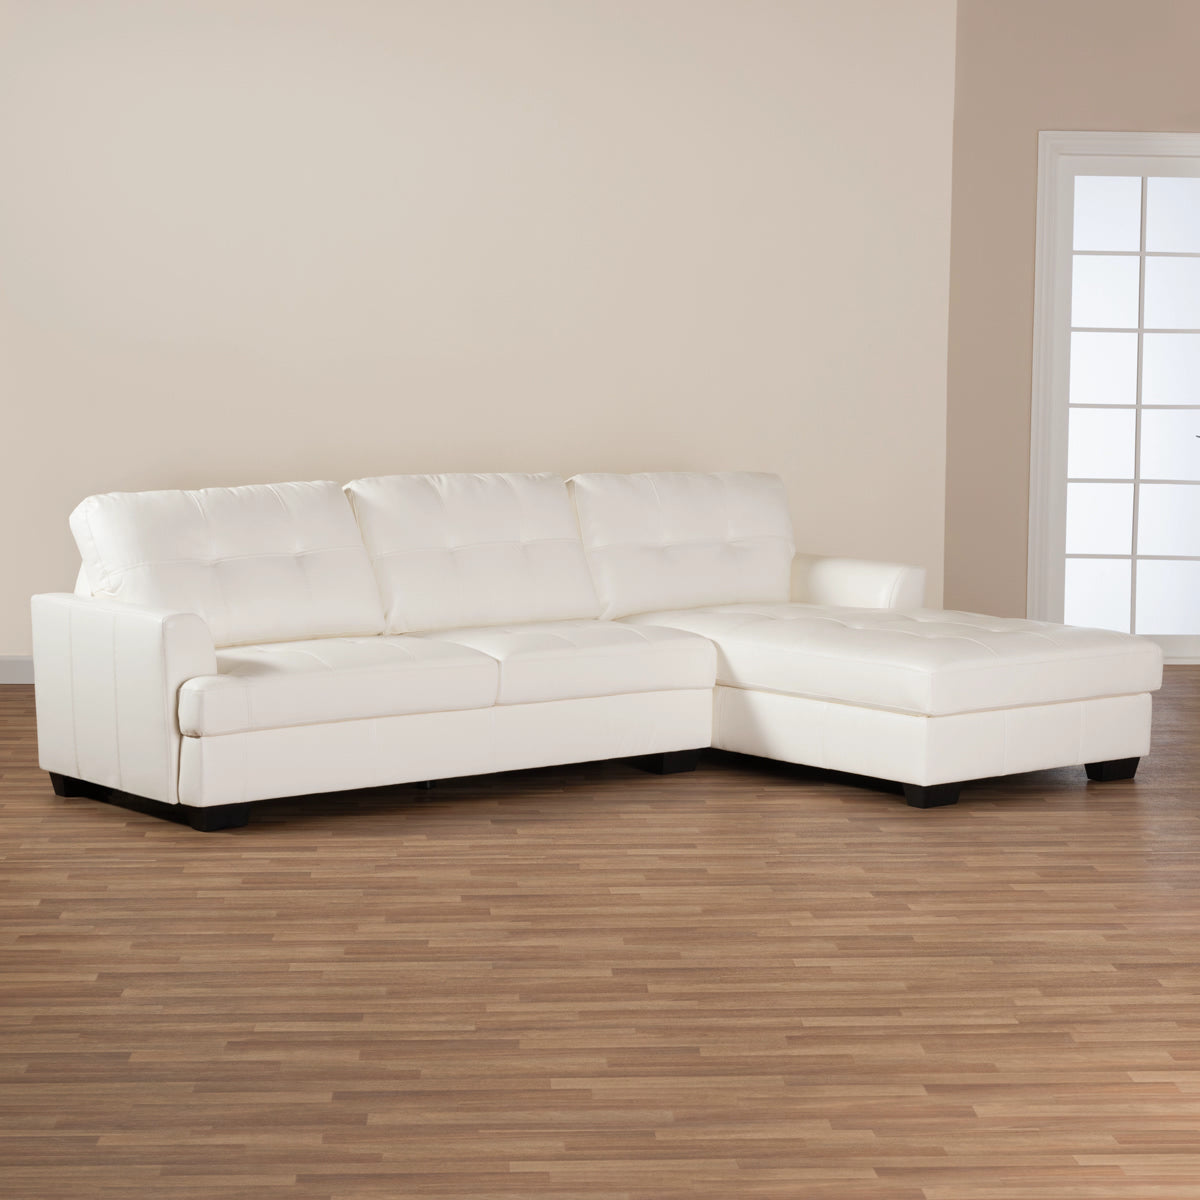 Baxton Studio Adalynn Modern and Contemporary White Faux Leather Upholstered Sectional Sofa Baxton Studio-sofas-Minimal And Modern - 5